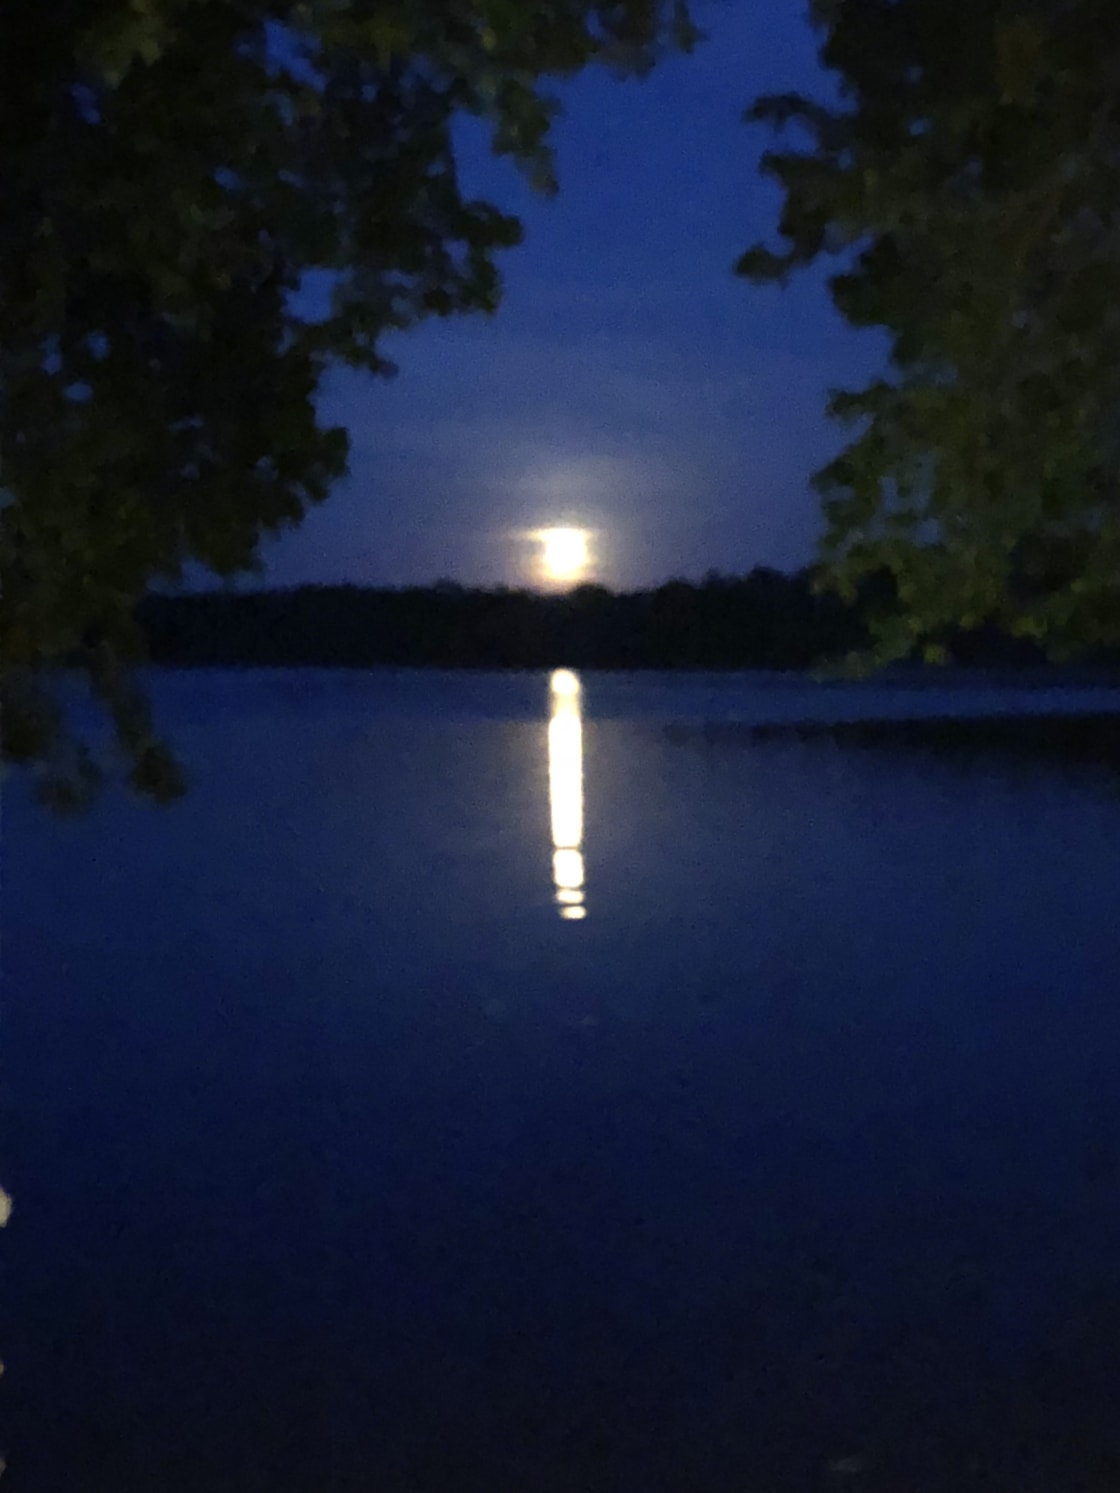 The moon rising over the lake. Looked like a fire the first time we saw it below the horizon. If you time it right, you can float in the water and watch the moon come up :)